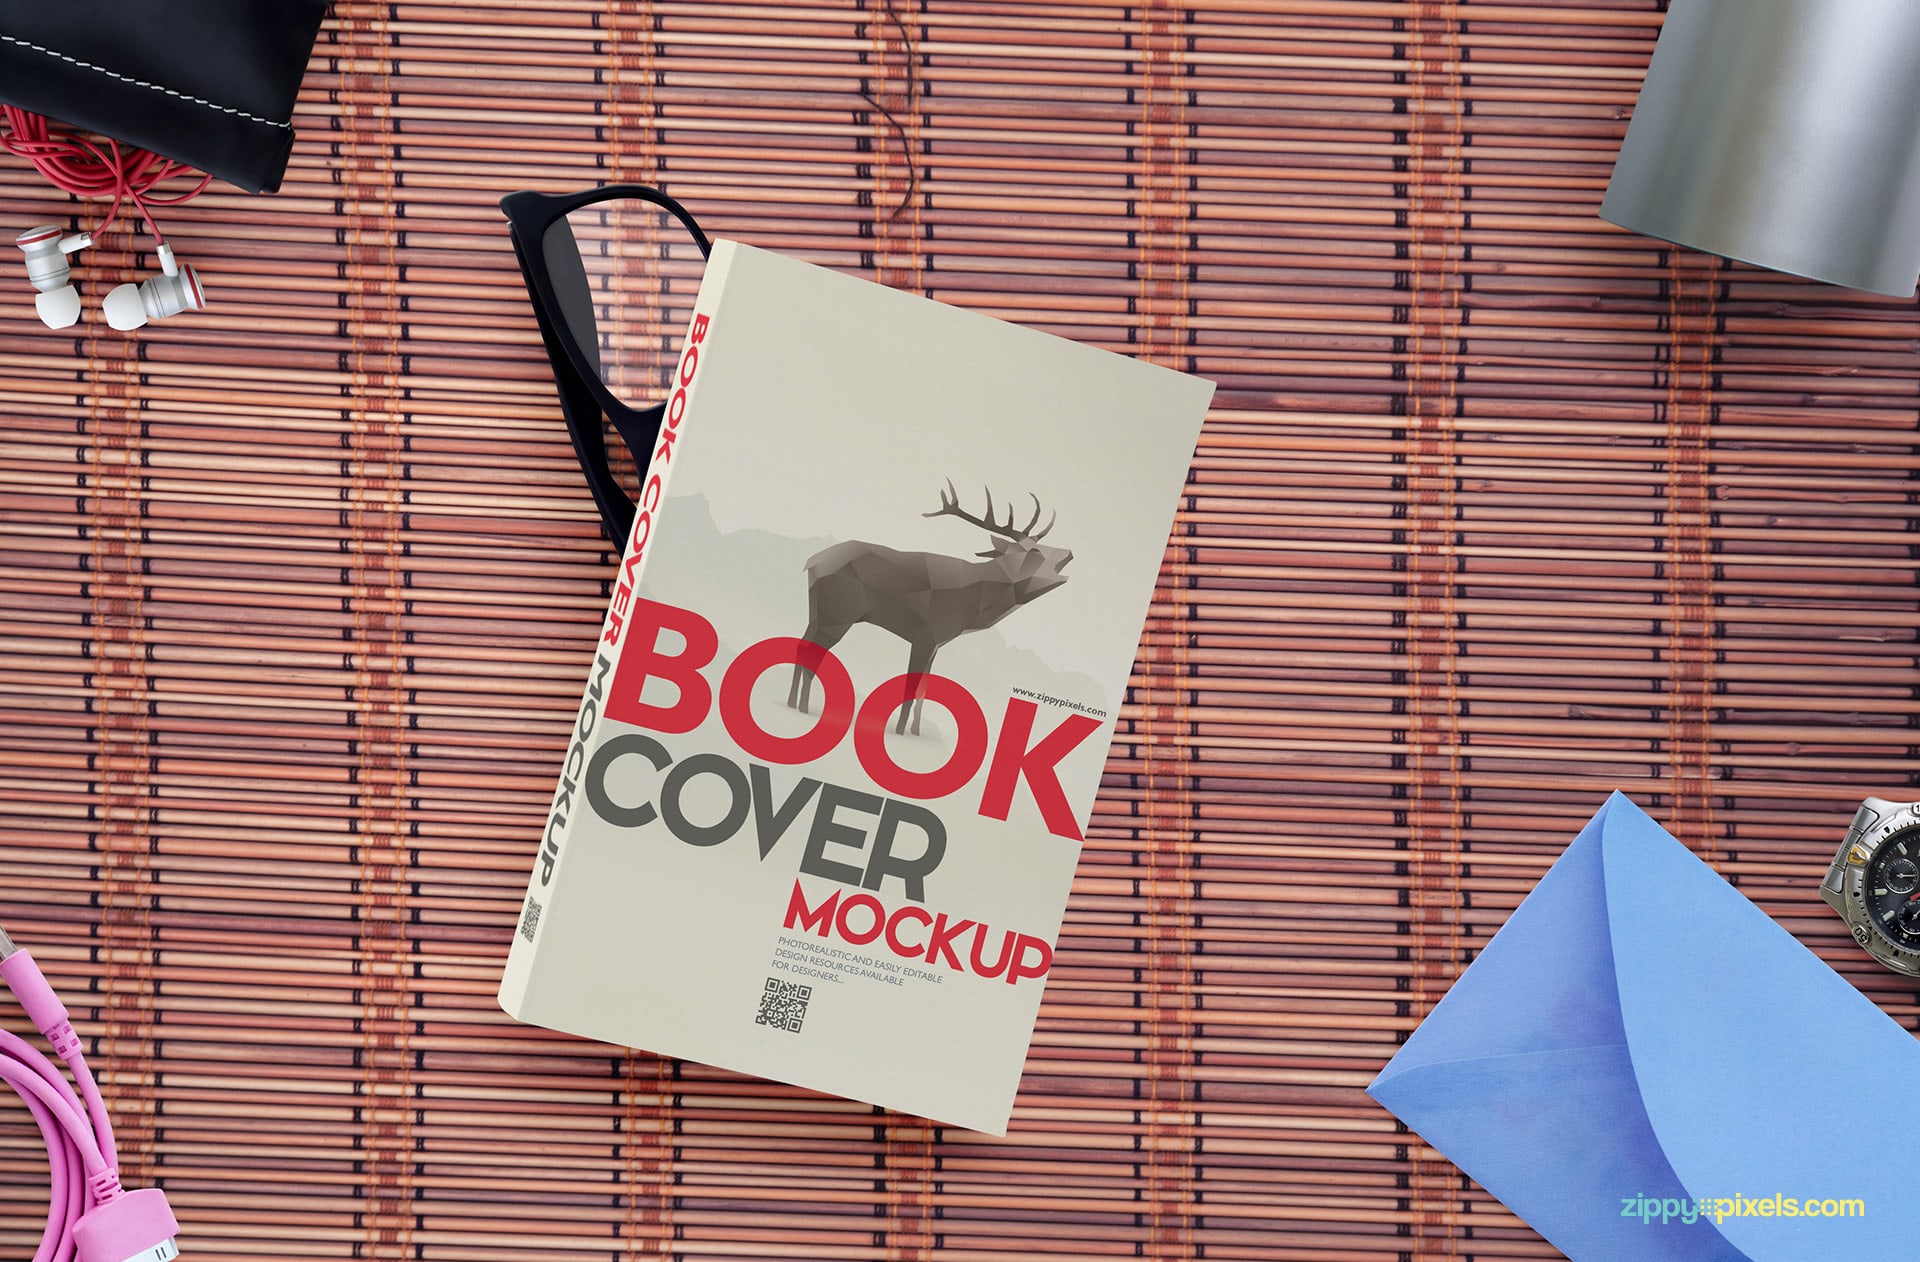 Paperback book lying on top of the glasses, envelope, wristwatch, pen holder, earphones with pouch & usb data cable